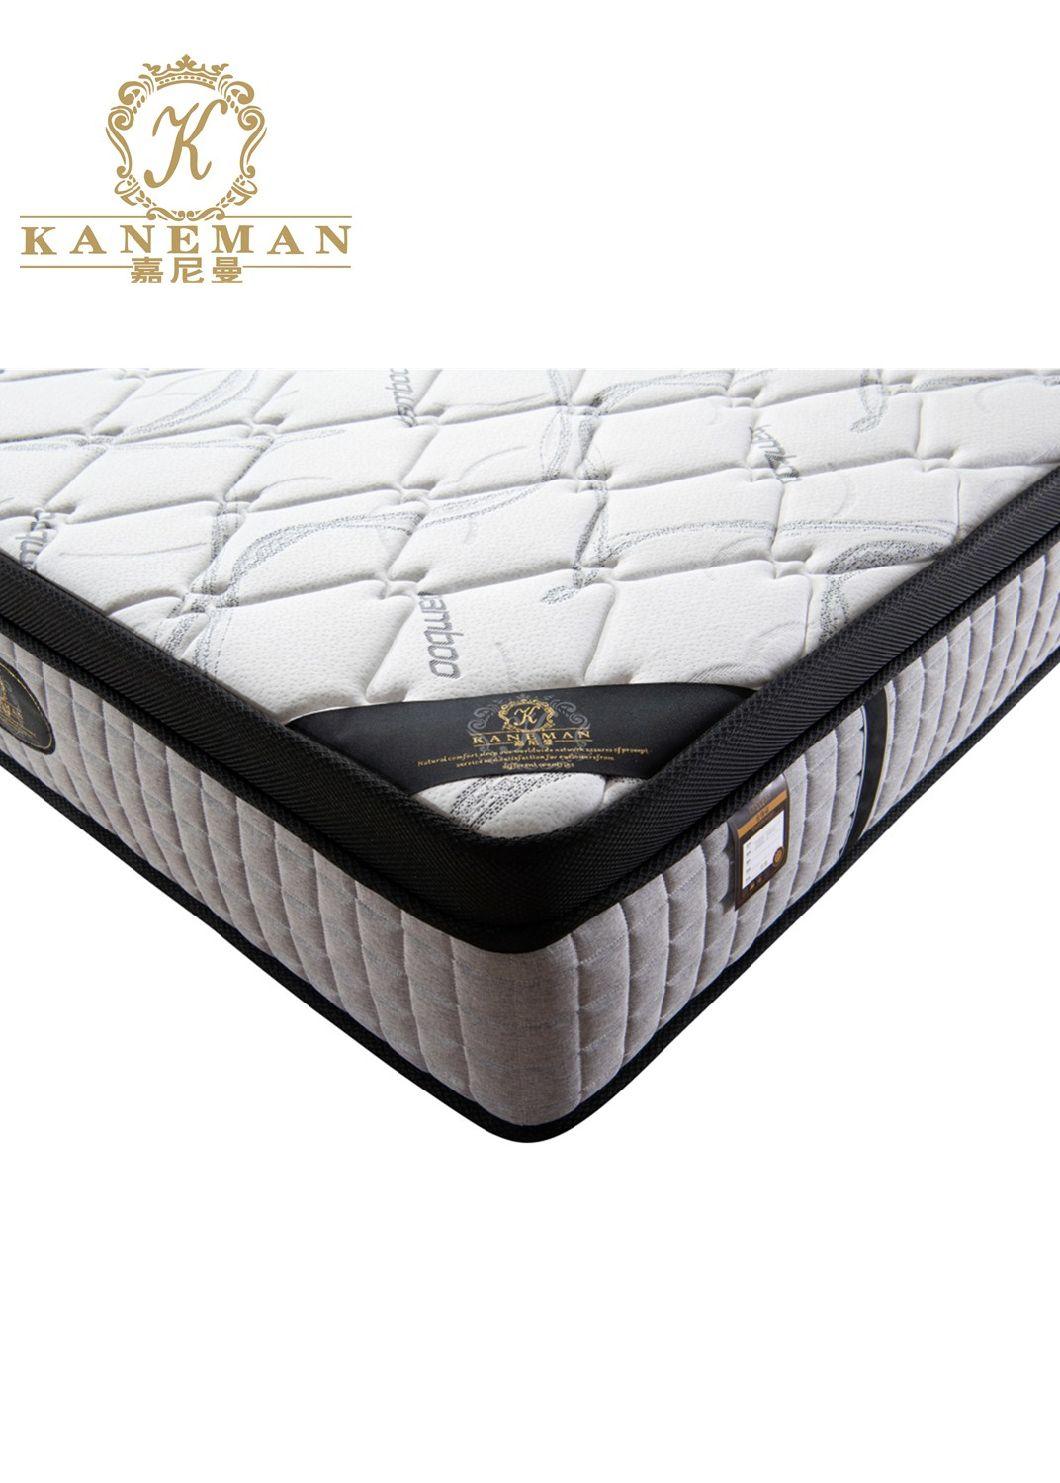 Rolled up Bamboo Fabric Pocket Spring Mattress Bed Mattress in a Box